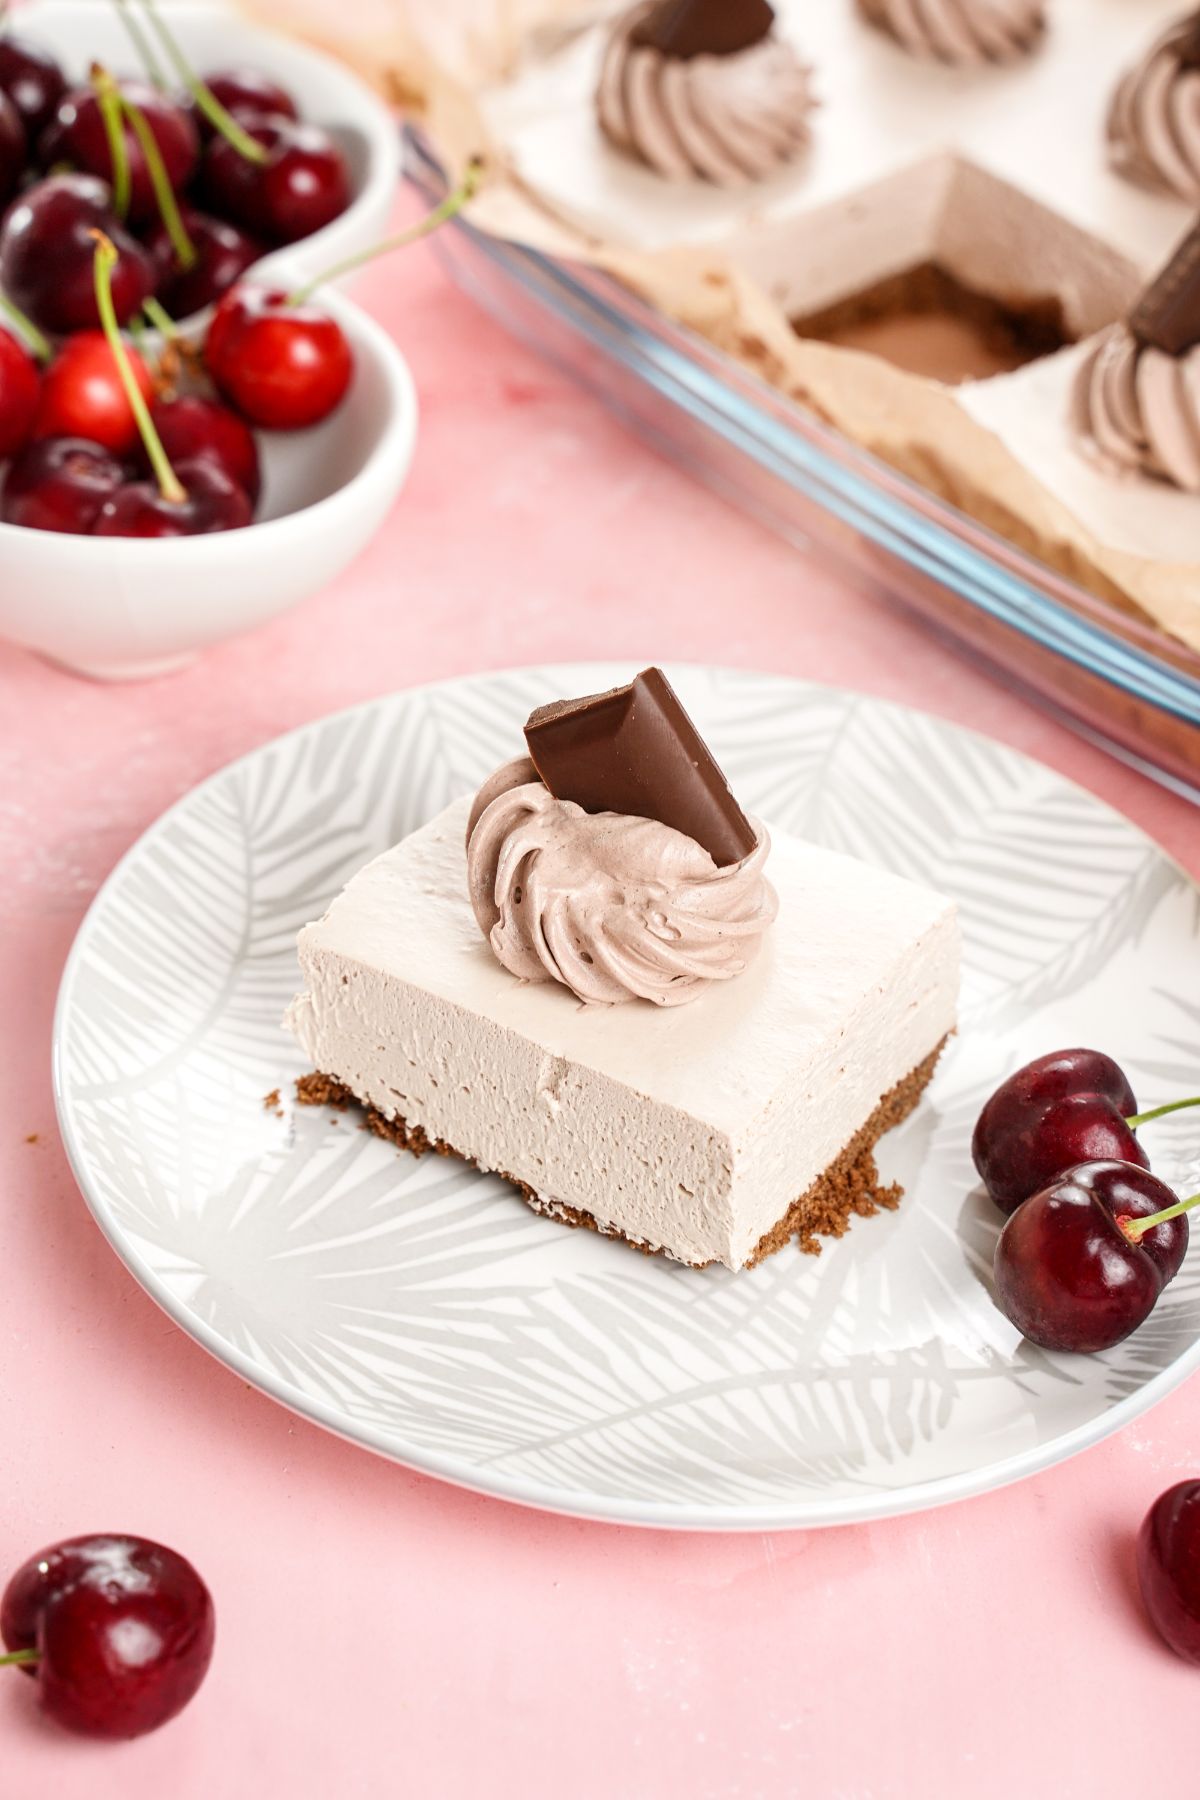 slice oc chocolate mousse bar on white plate sitting on pink table